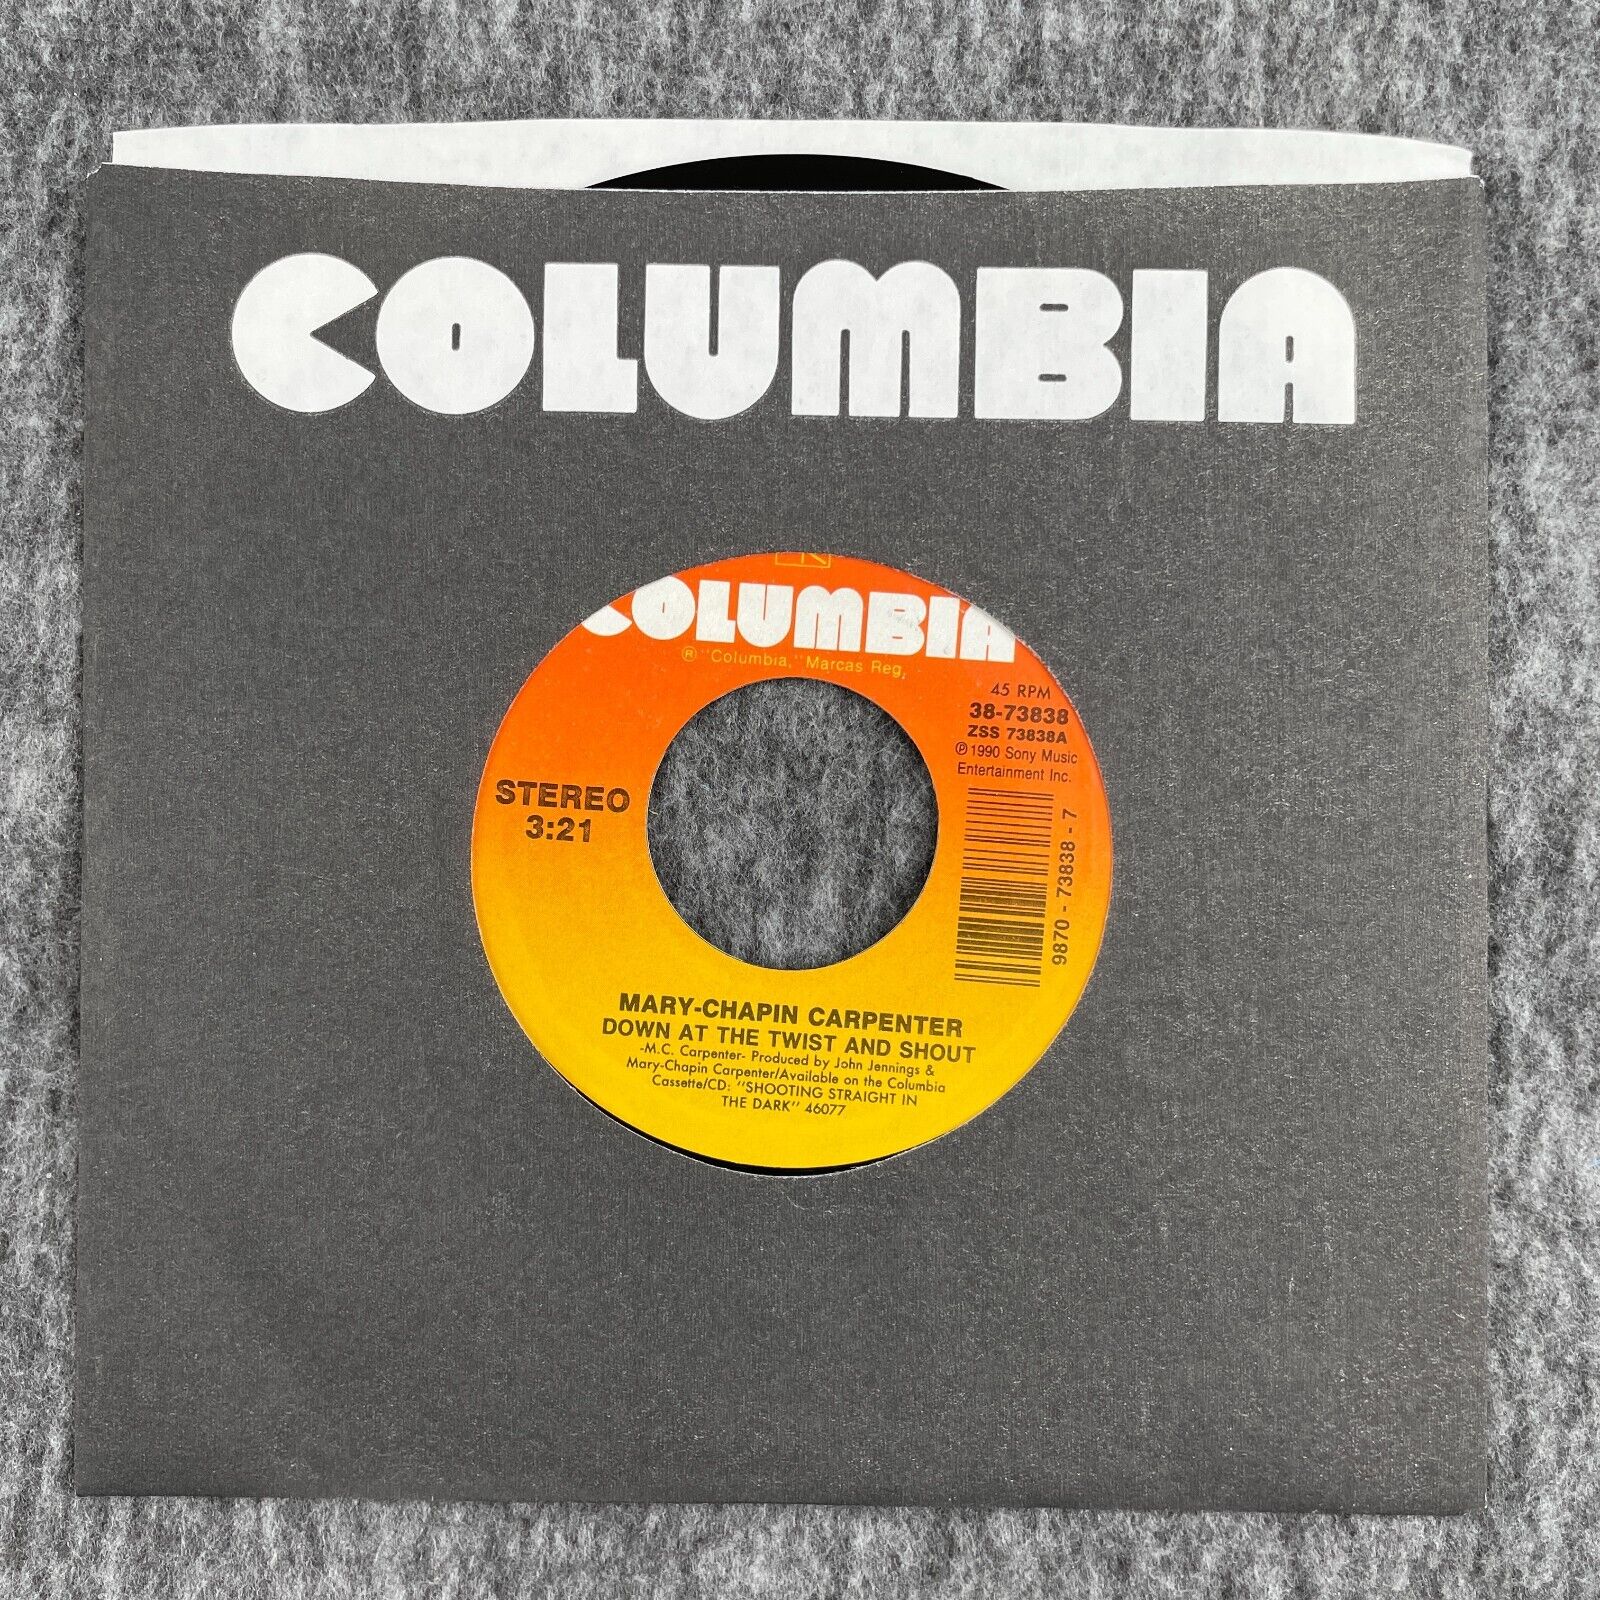 MARY-CHAPIN CARPENTER Down At The Twist And Shout / Halley 45 Columbia 38-73838